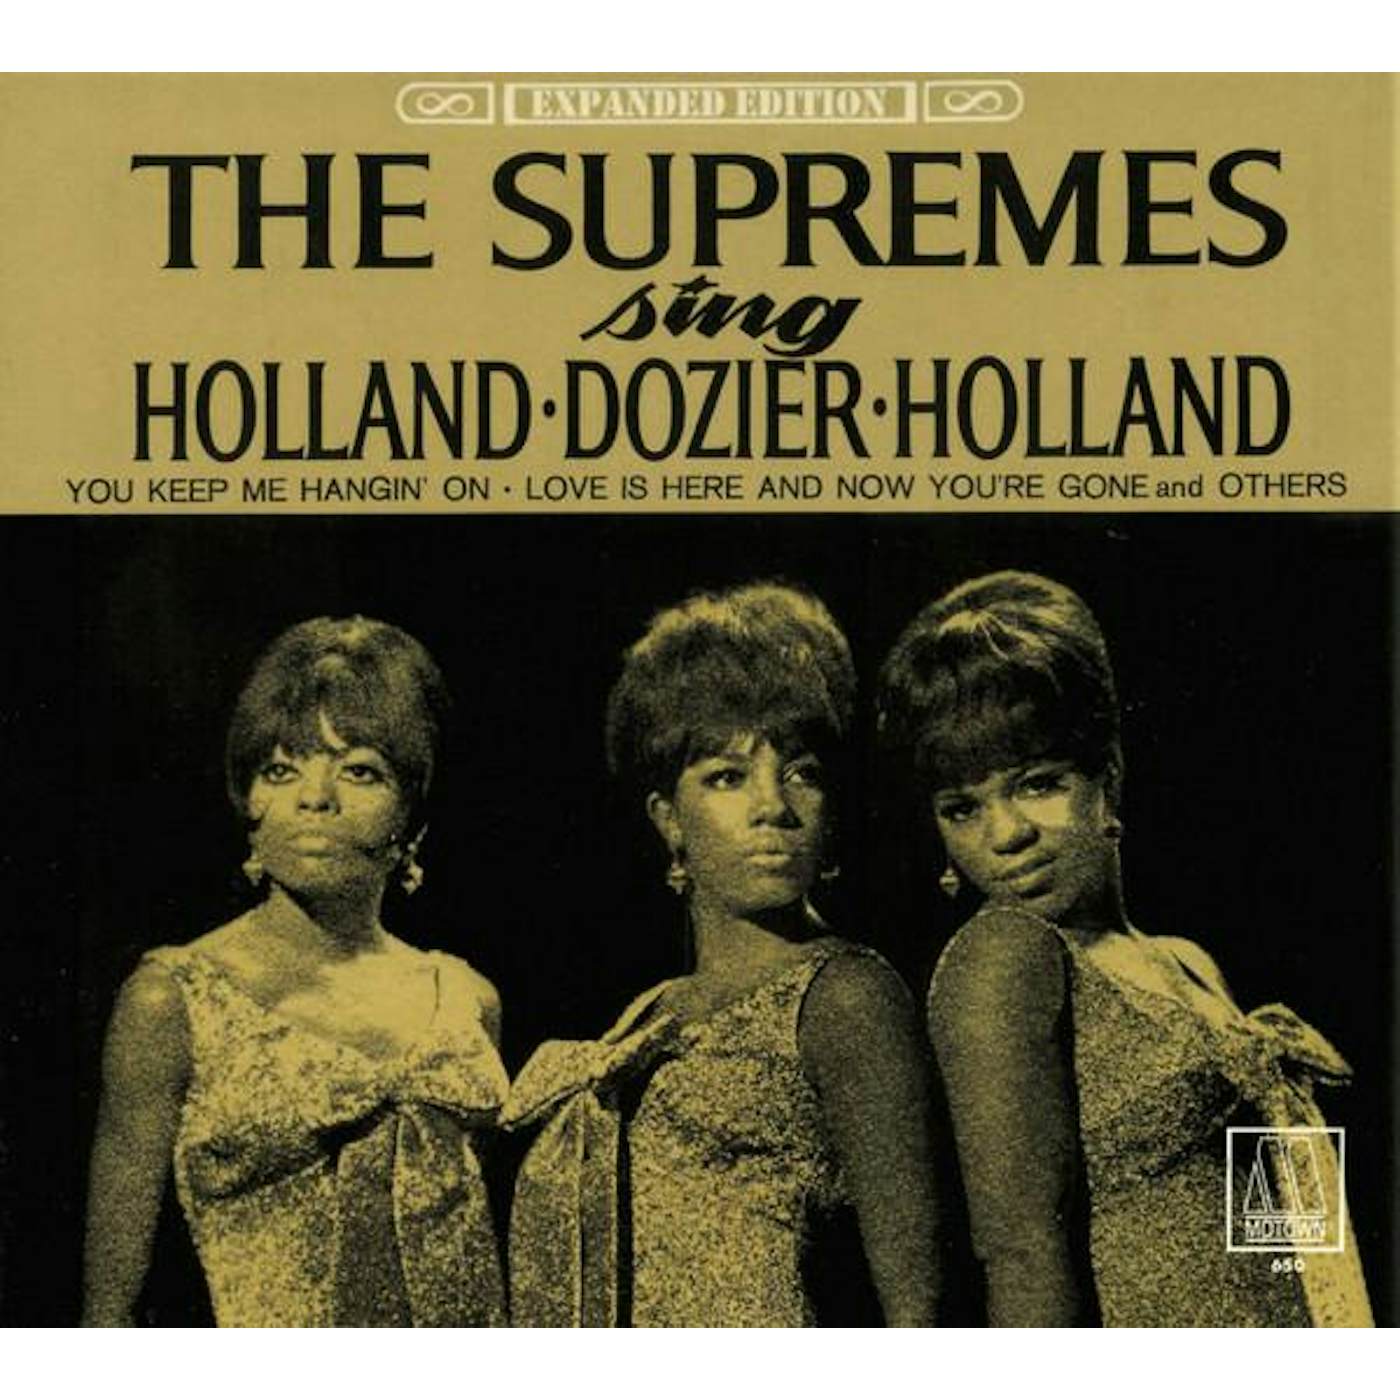 The Supremes SING HOLLAND-DOZIER-HOLLAND (EXPANDED EDITION) CD